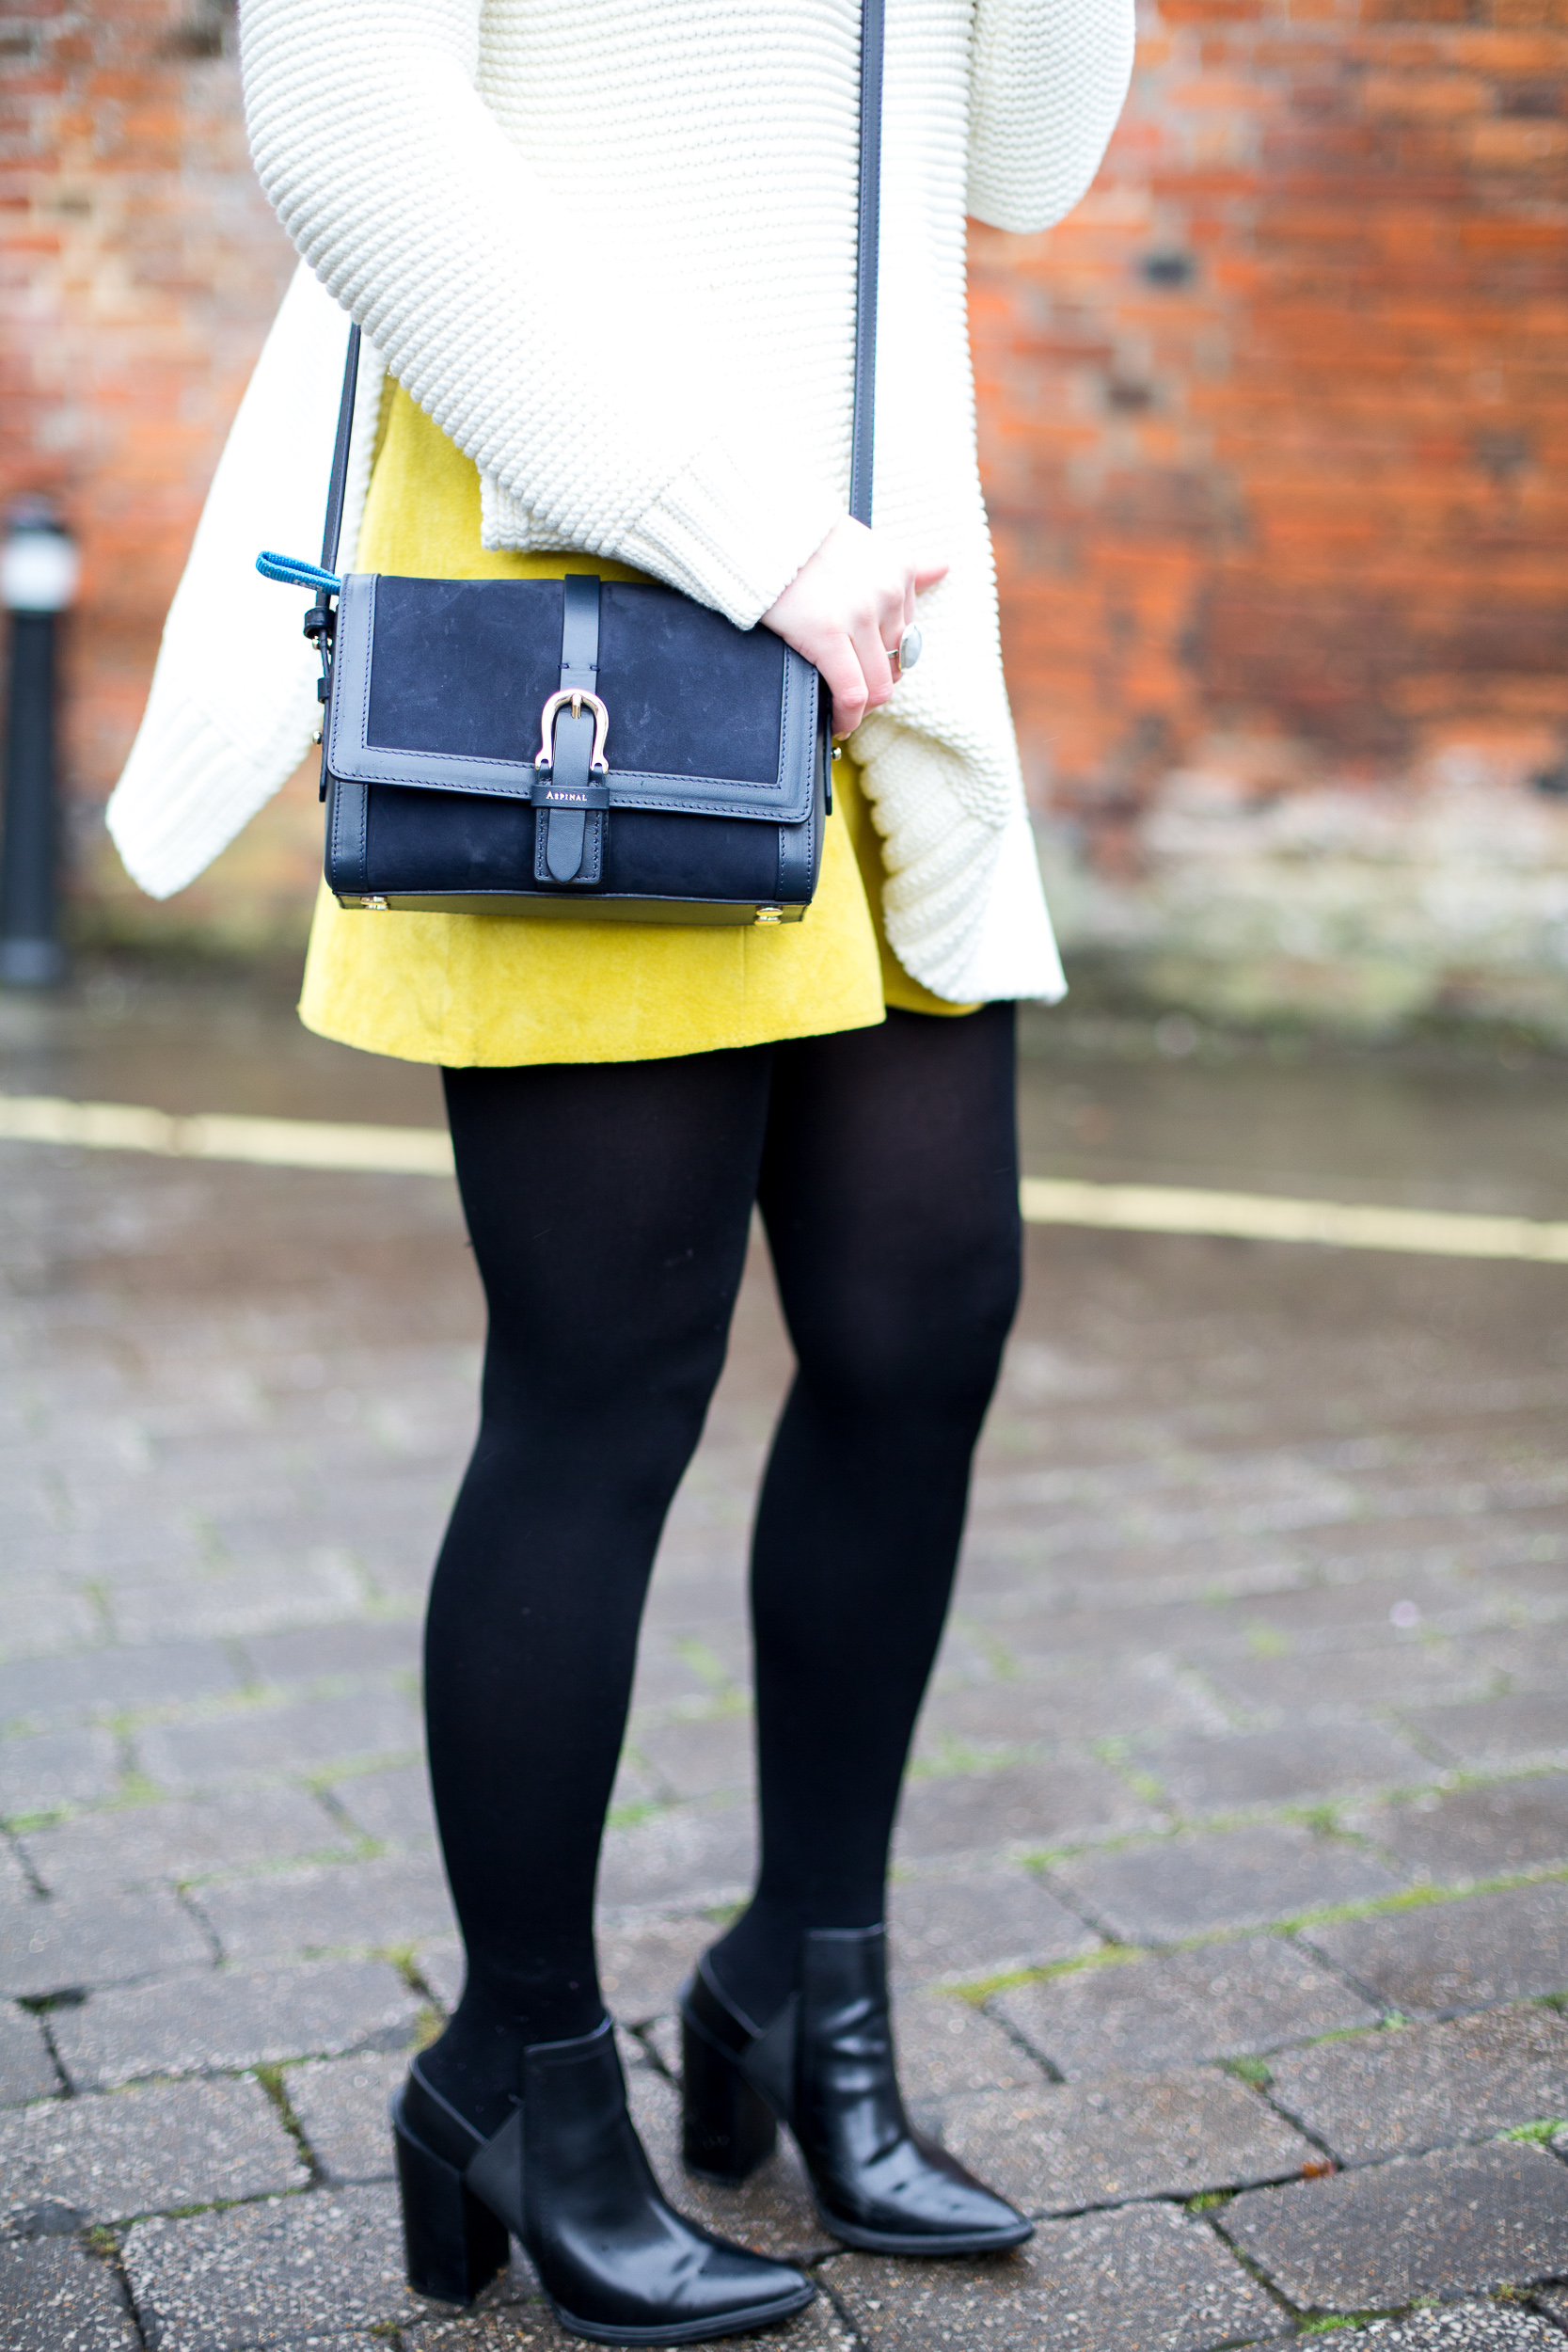 Yellow Suede Skirt